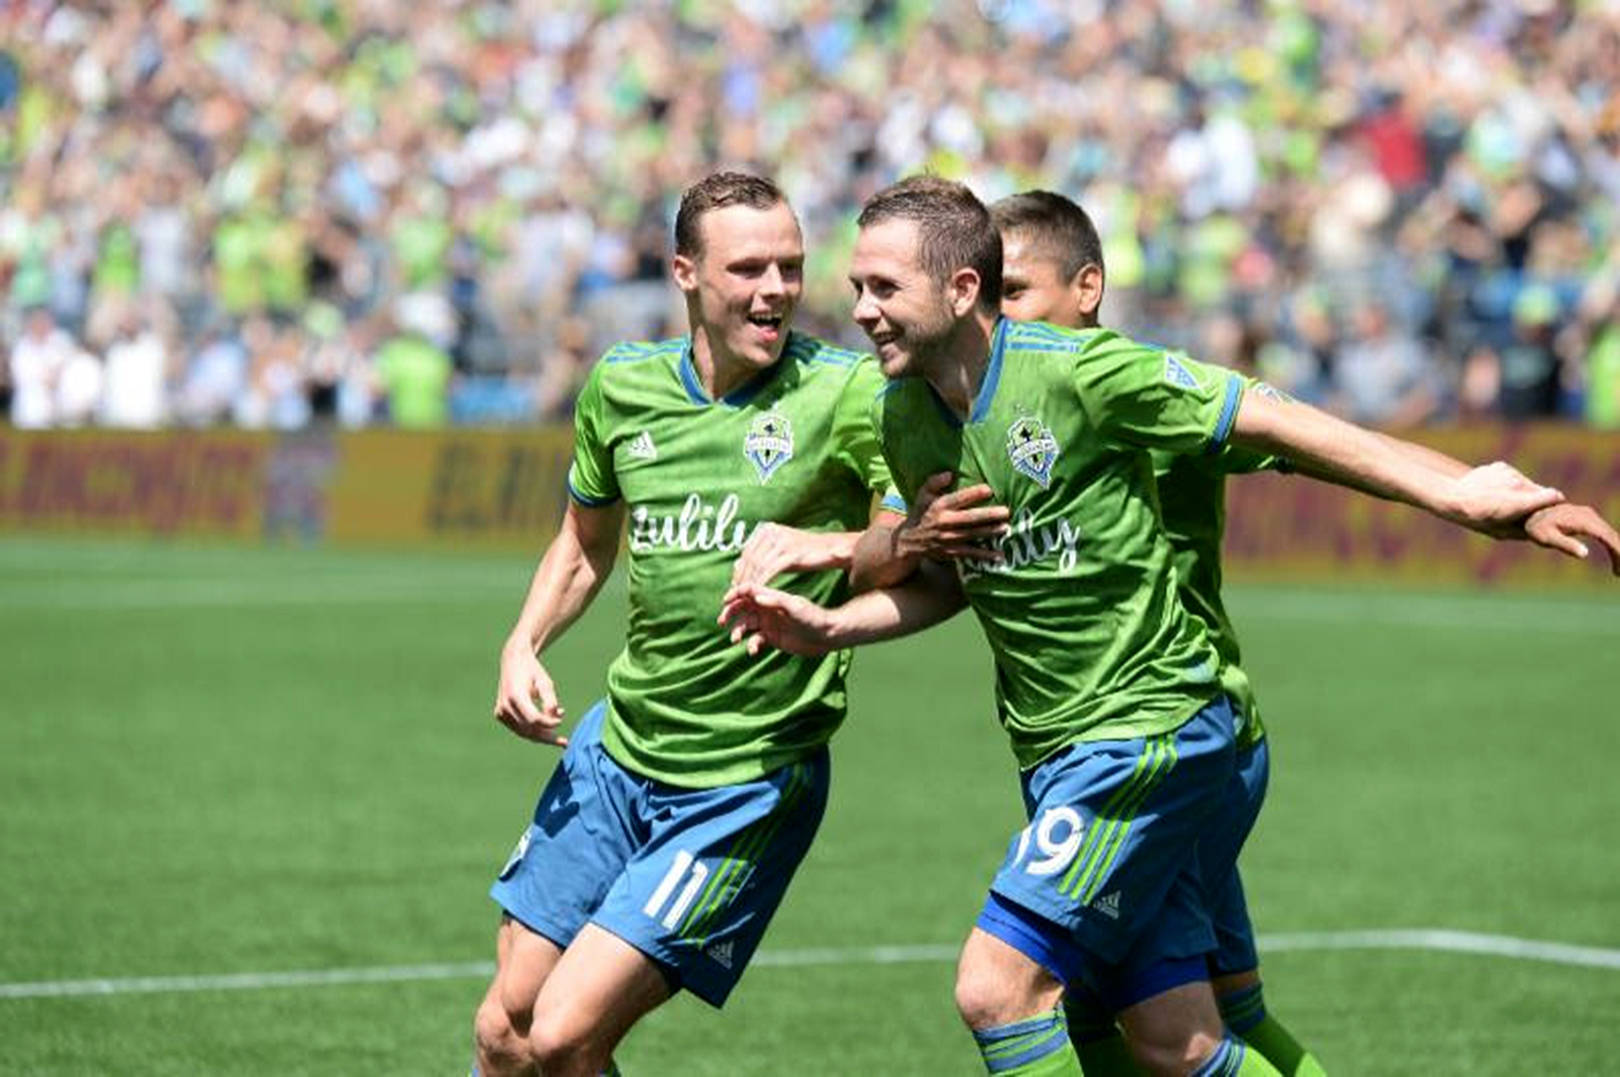 Harry Shipp (19) celebrates his game-winning goal with his Sounders teammates Sunday in Seattle. (Charis Wilson/Sounders FC).